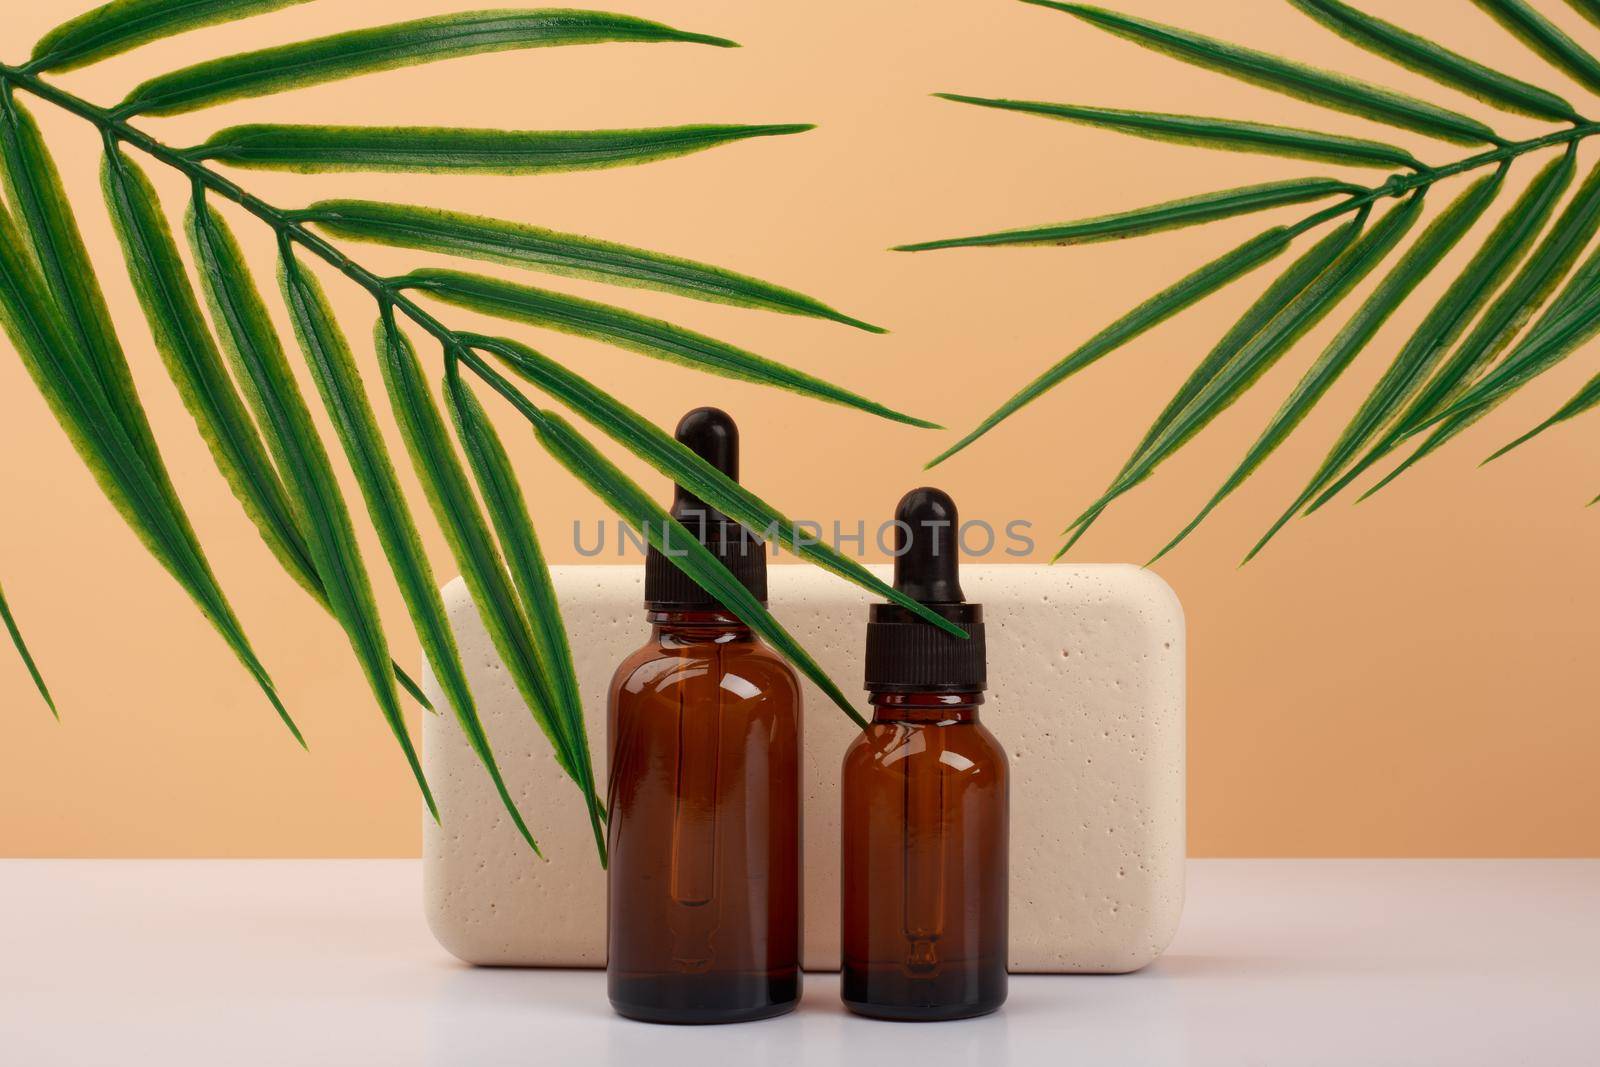 Two skin serum in dark brown bottles against beige podium and beige background with palm leaves. Concept of anti aging serum with natural ingredients 